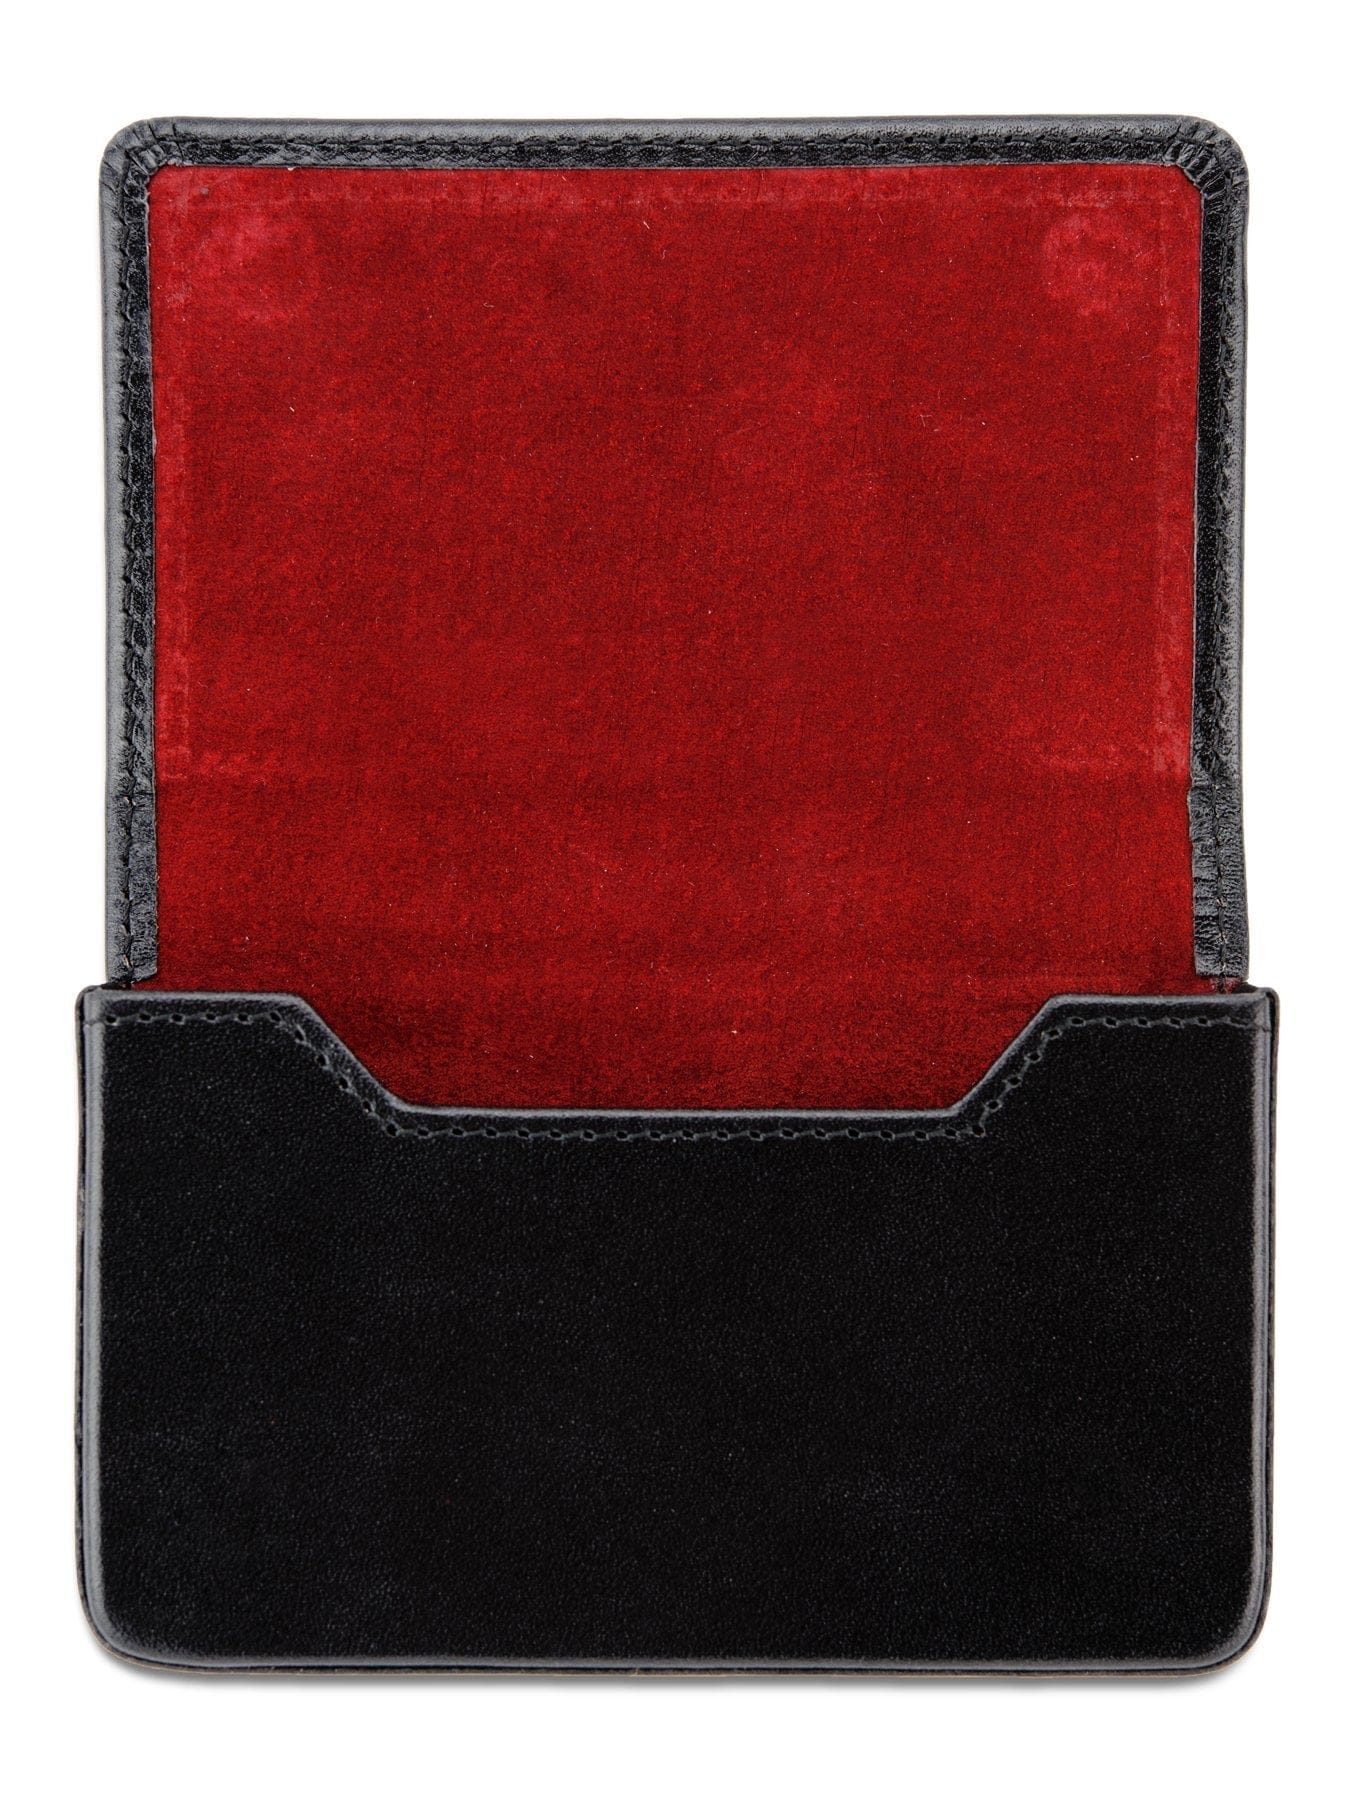 Black Calf Leather with Red Suede Business Card Holder - Hilditch & Key